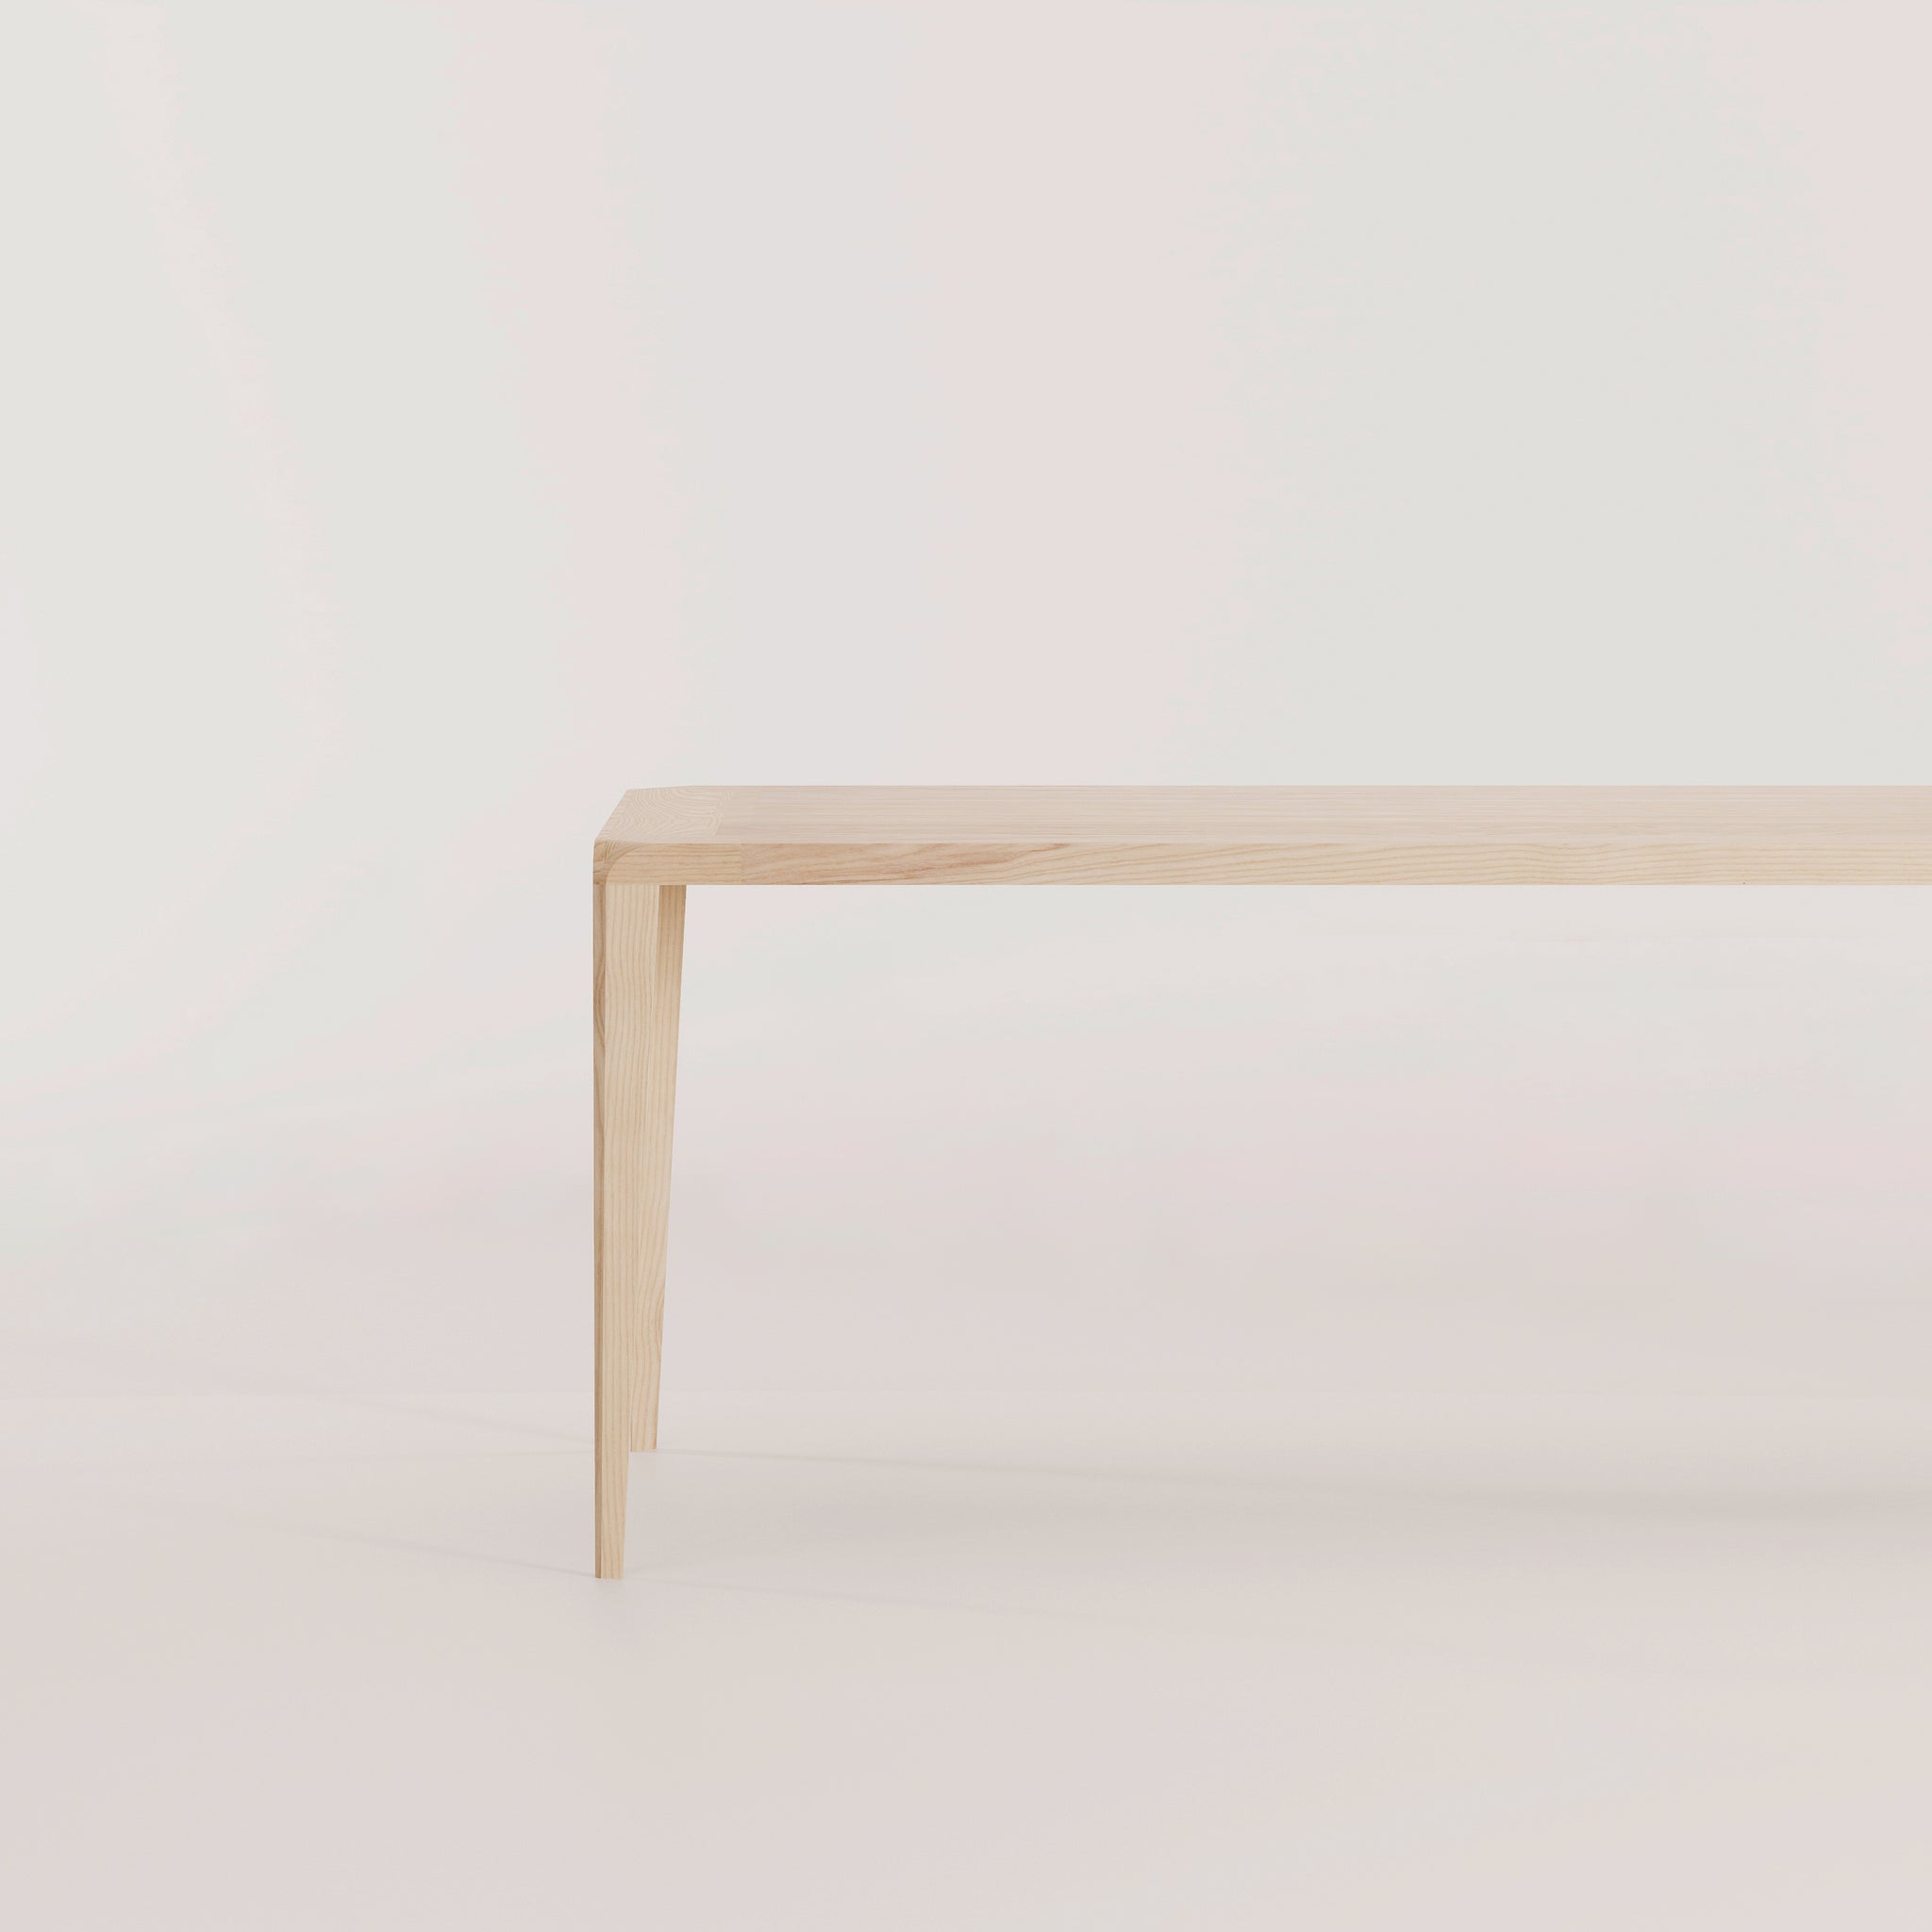 Dye table by Mast Furniture